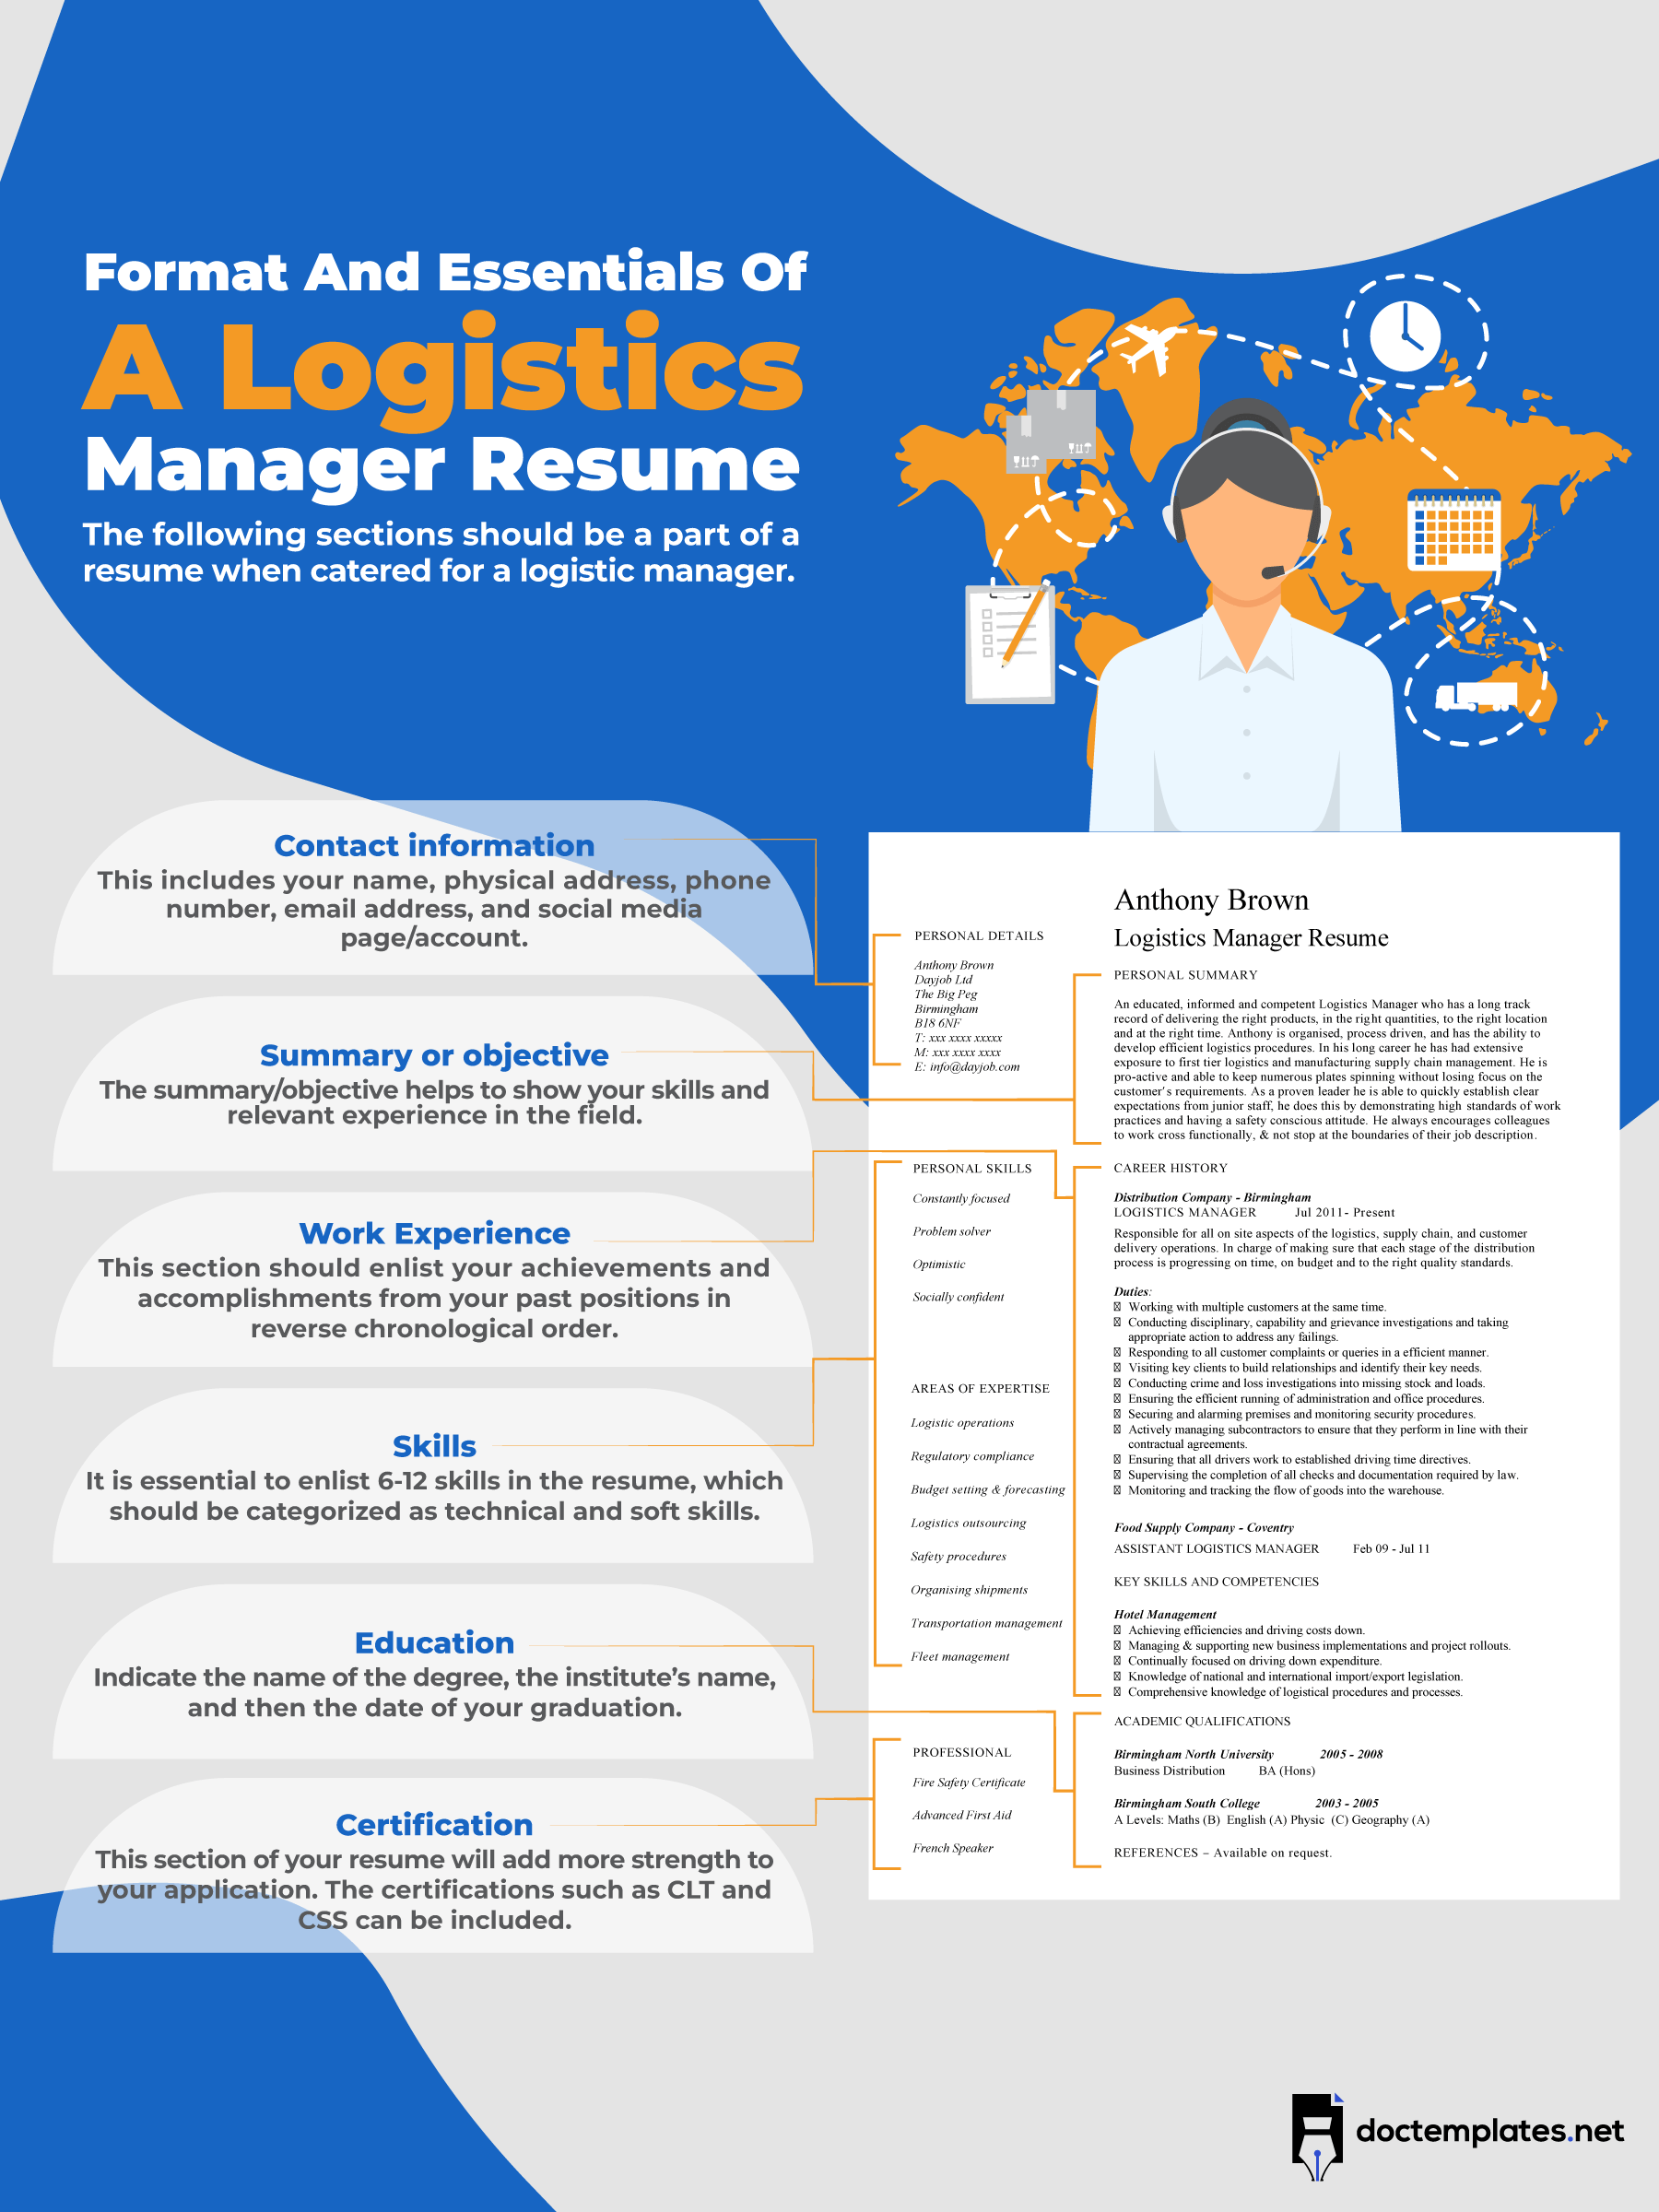 This infographic is about format & essentials of logistics manager resume.